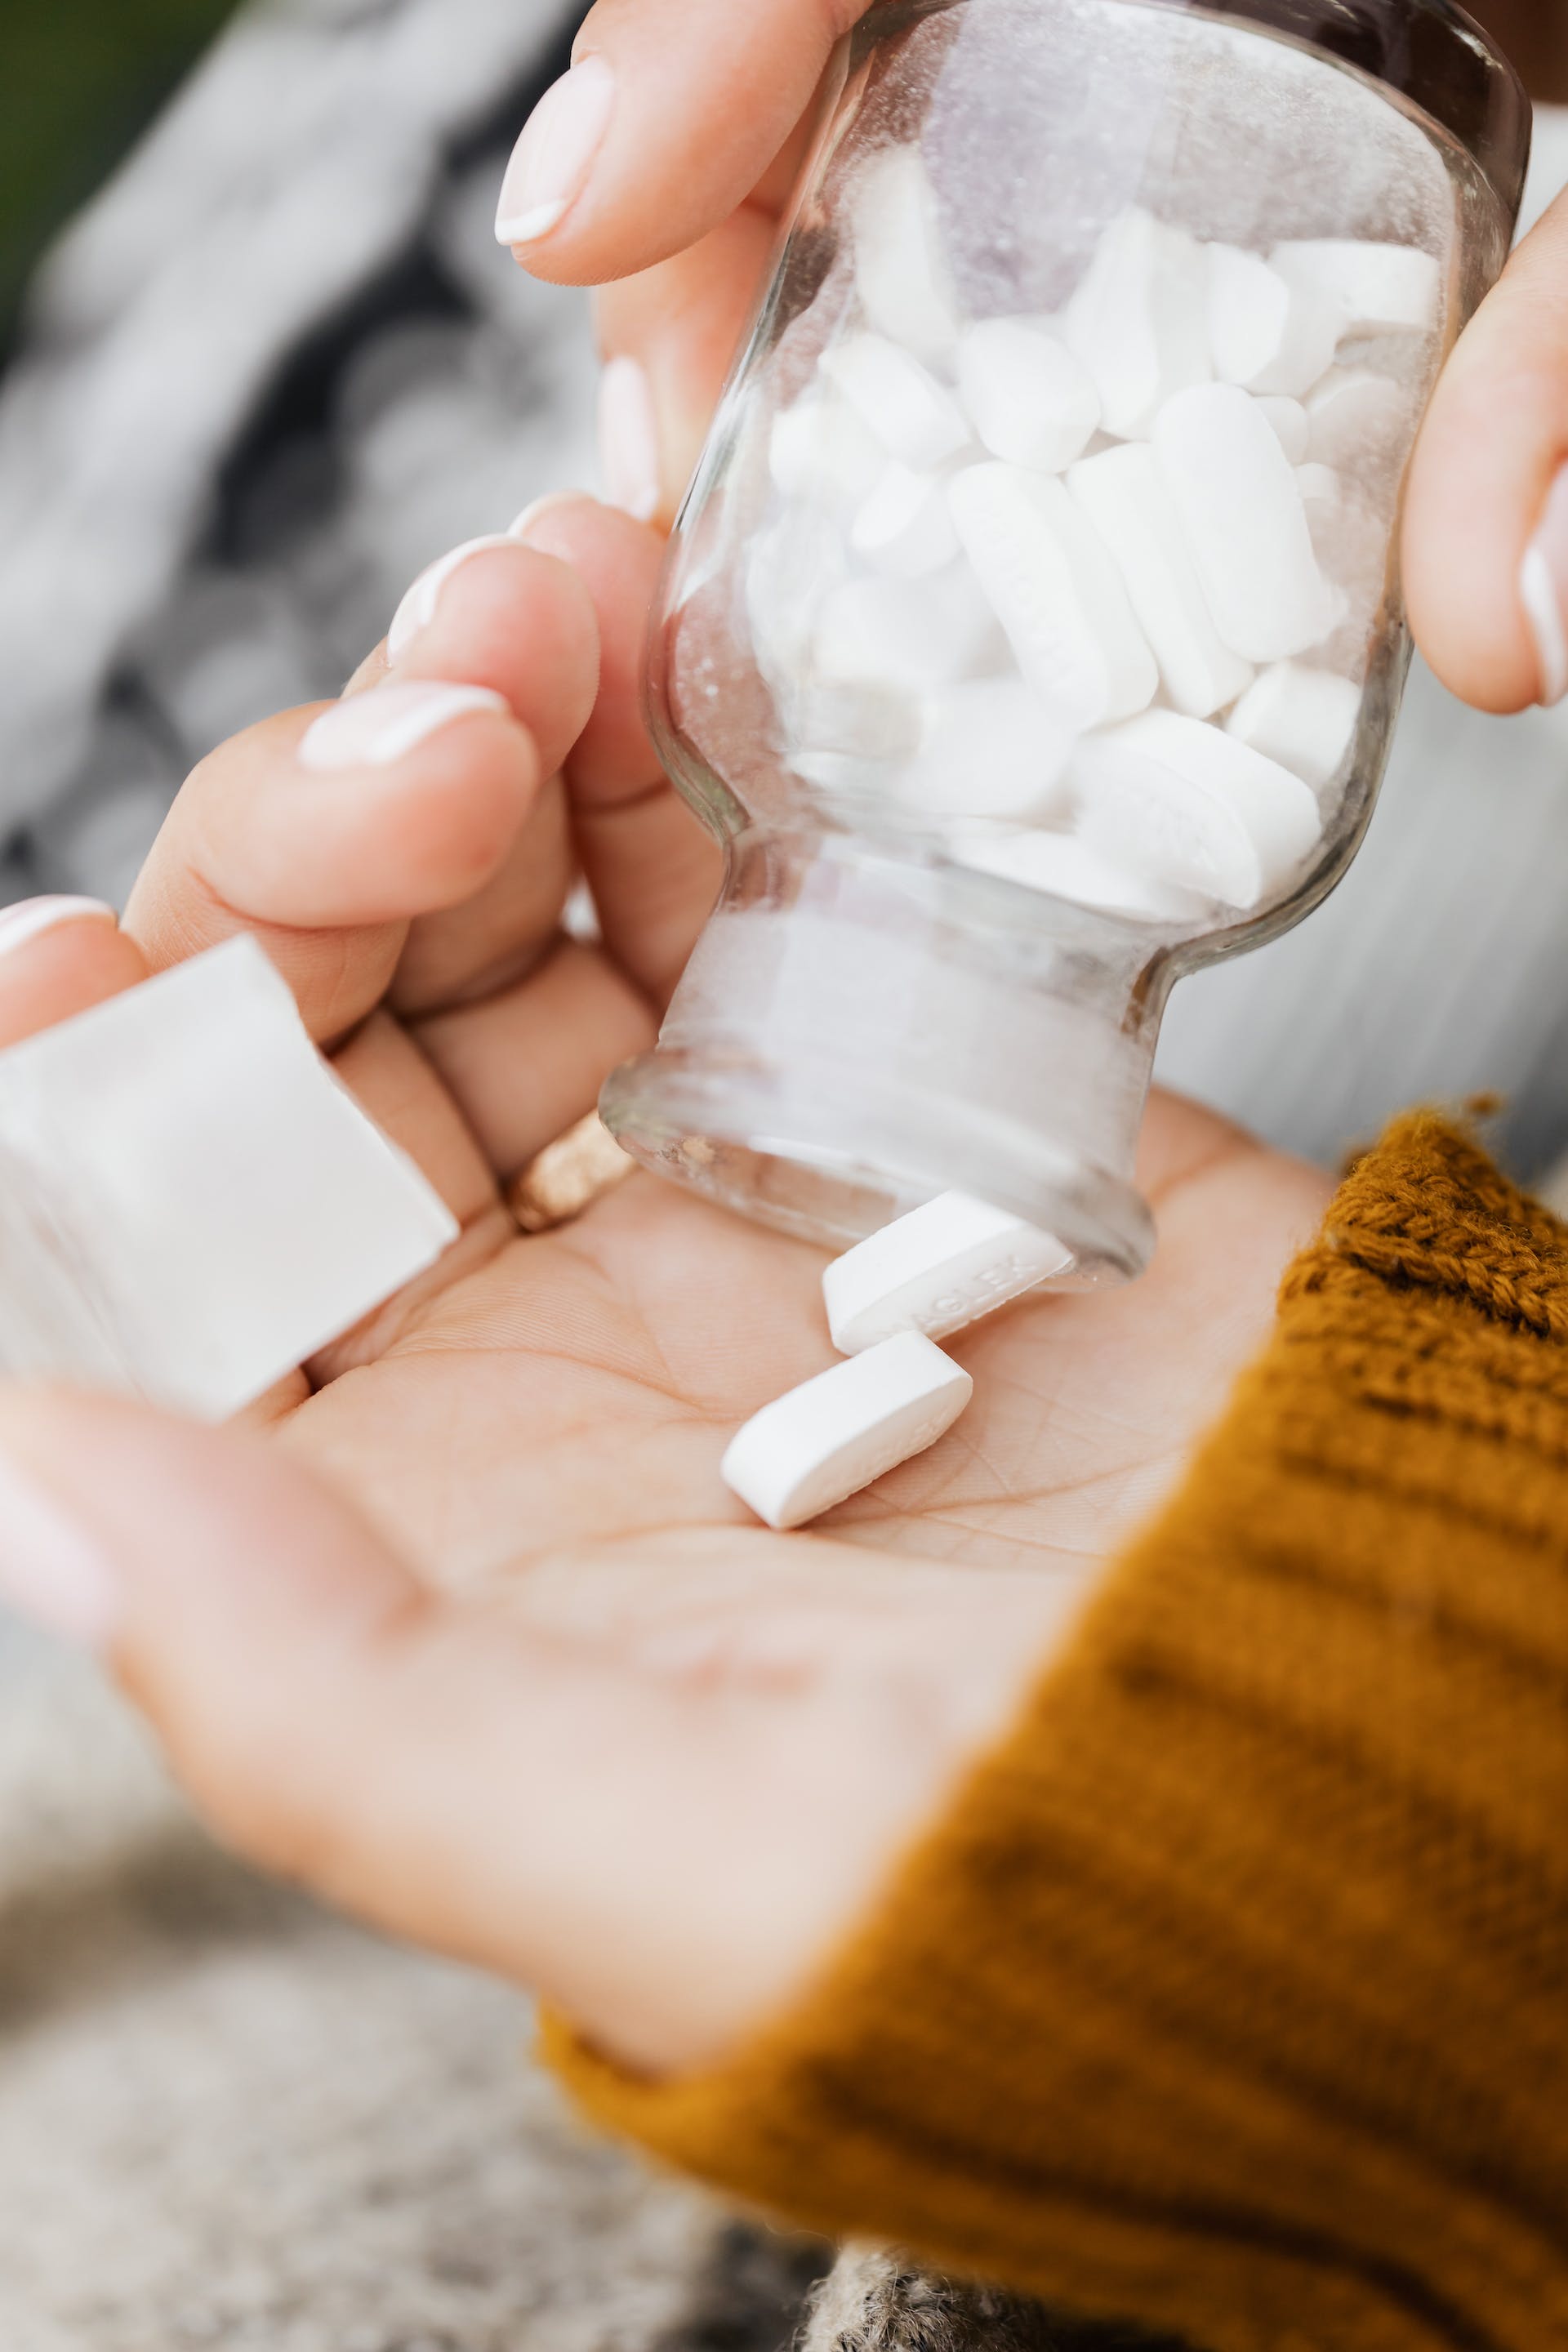 Person taking pills from a bottle | Source: Pexels